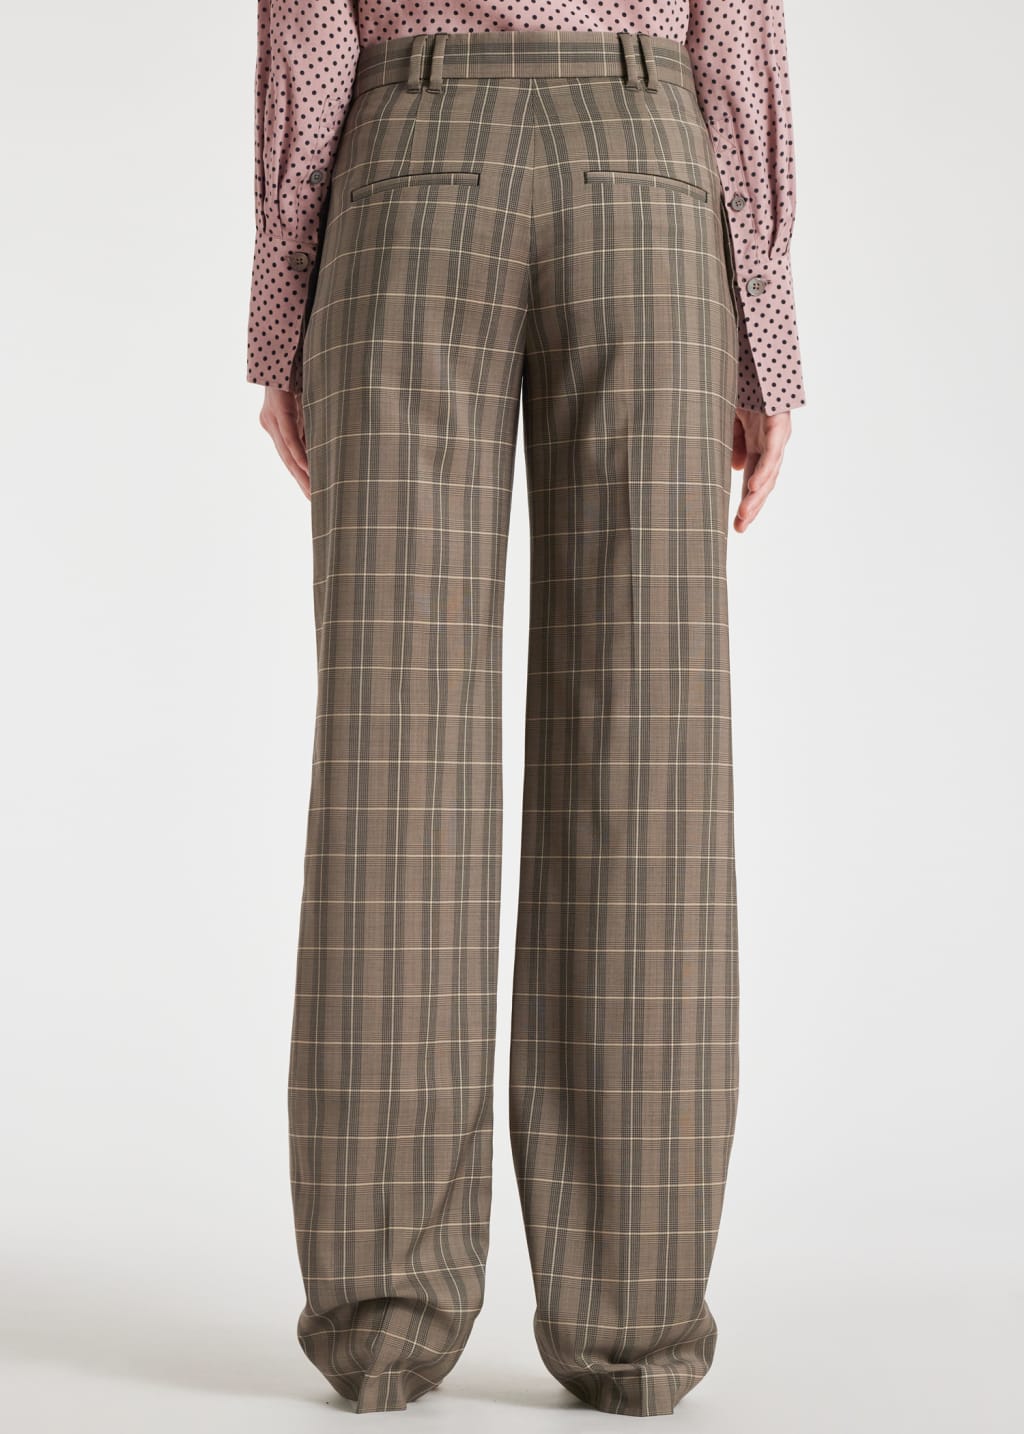 Model View - Women's Taupe Check Flare Trousers Paul Smith